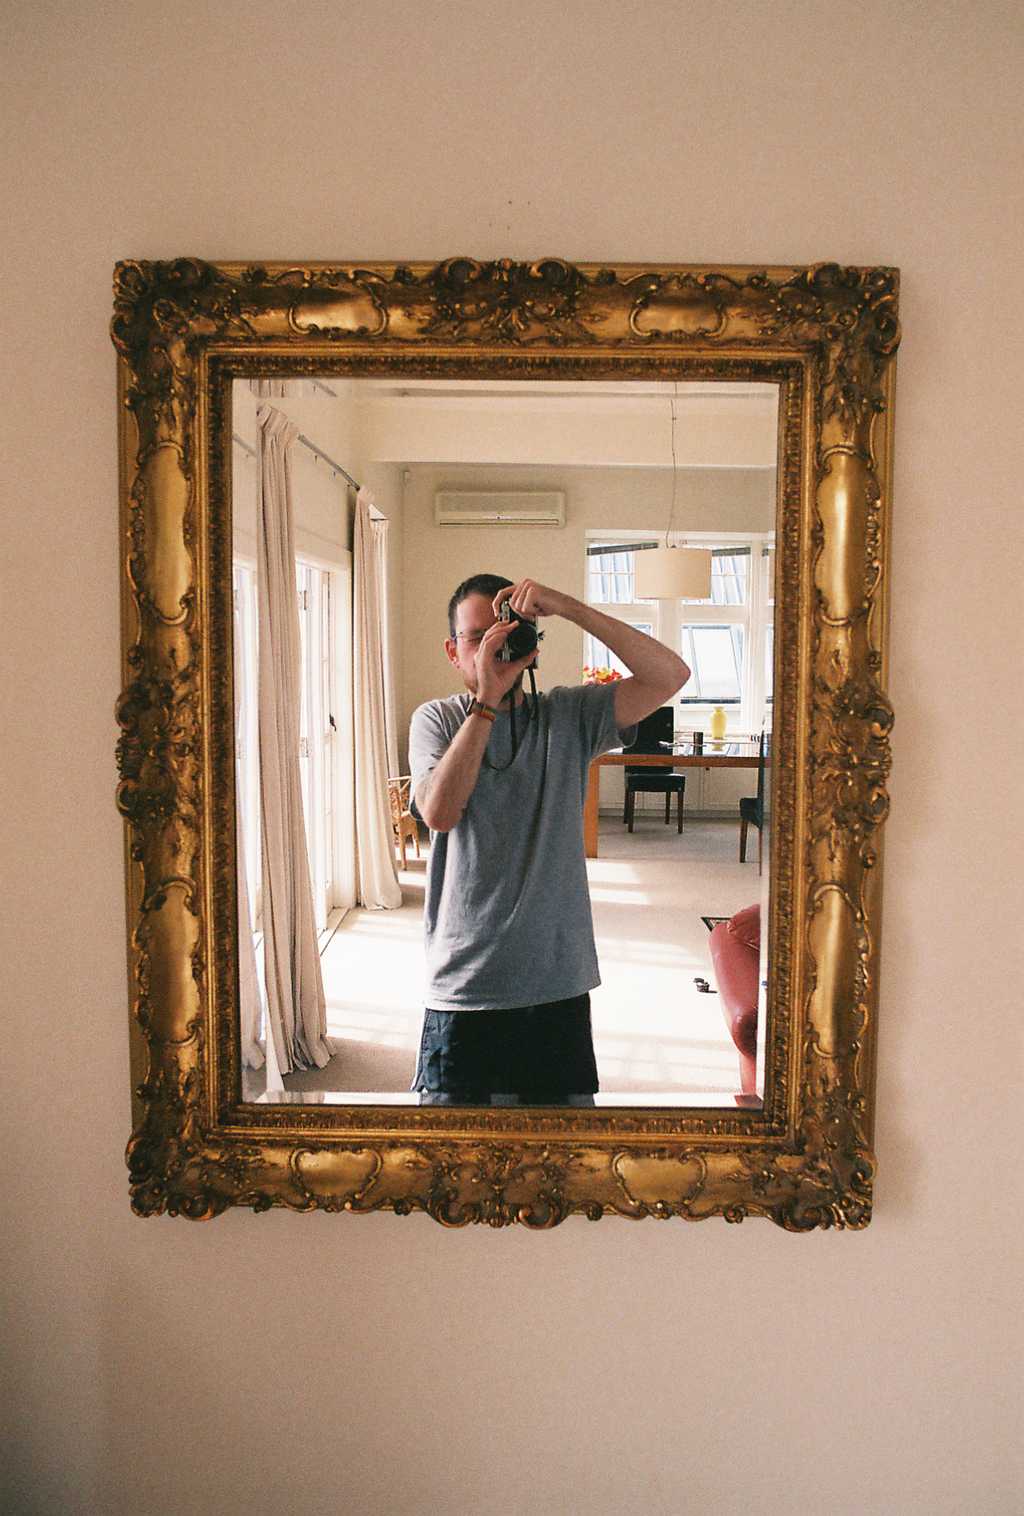 A guy holding a camera reflected in a mirror with an ornate frame